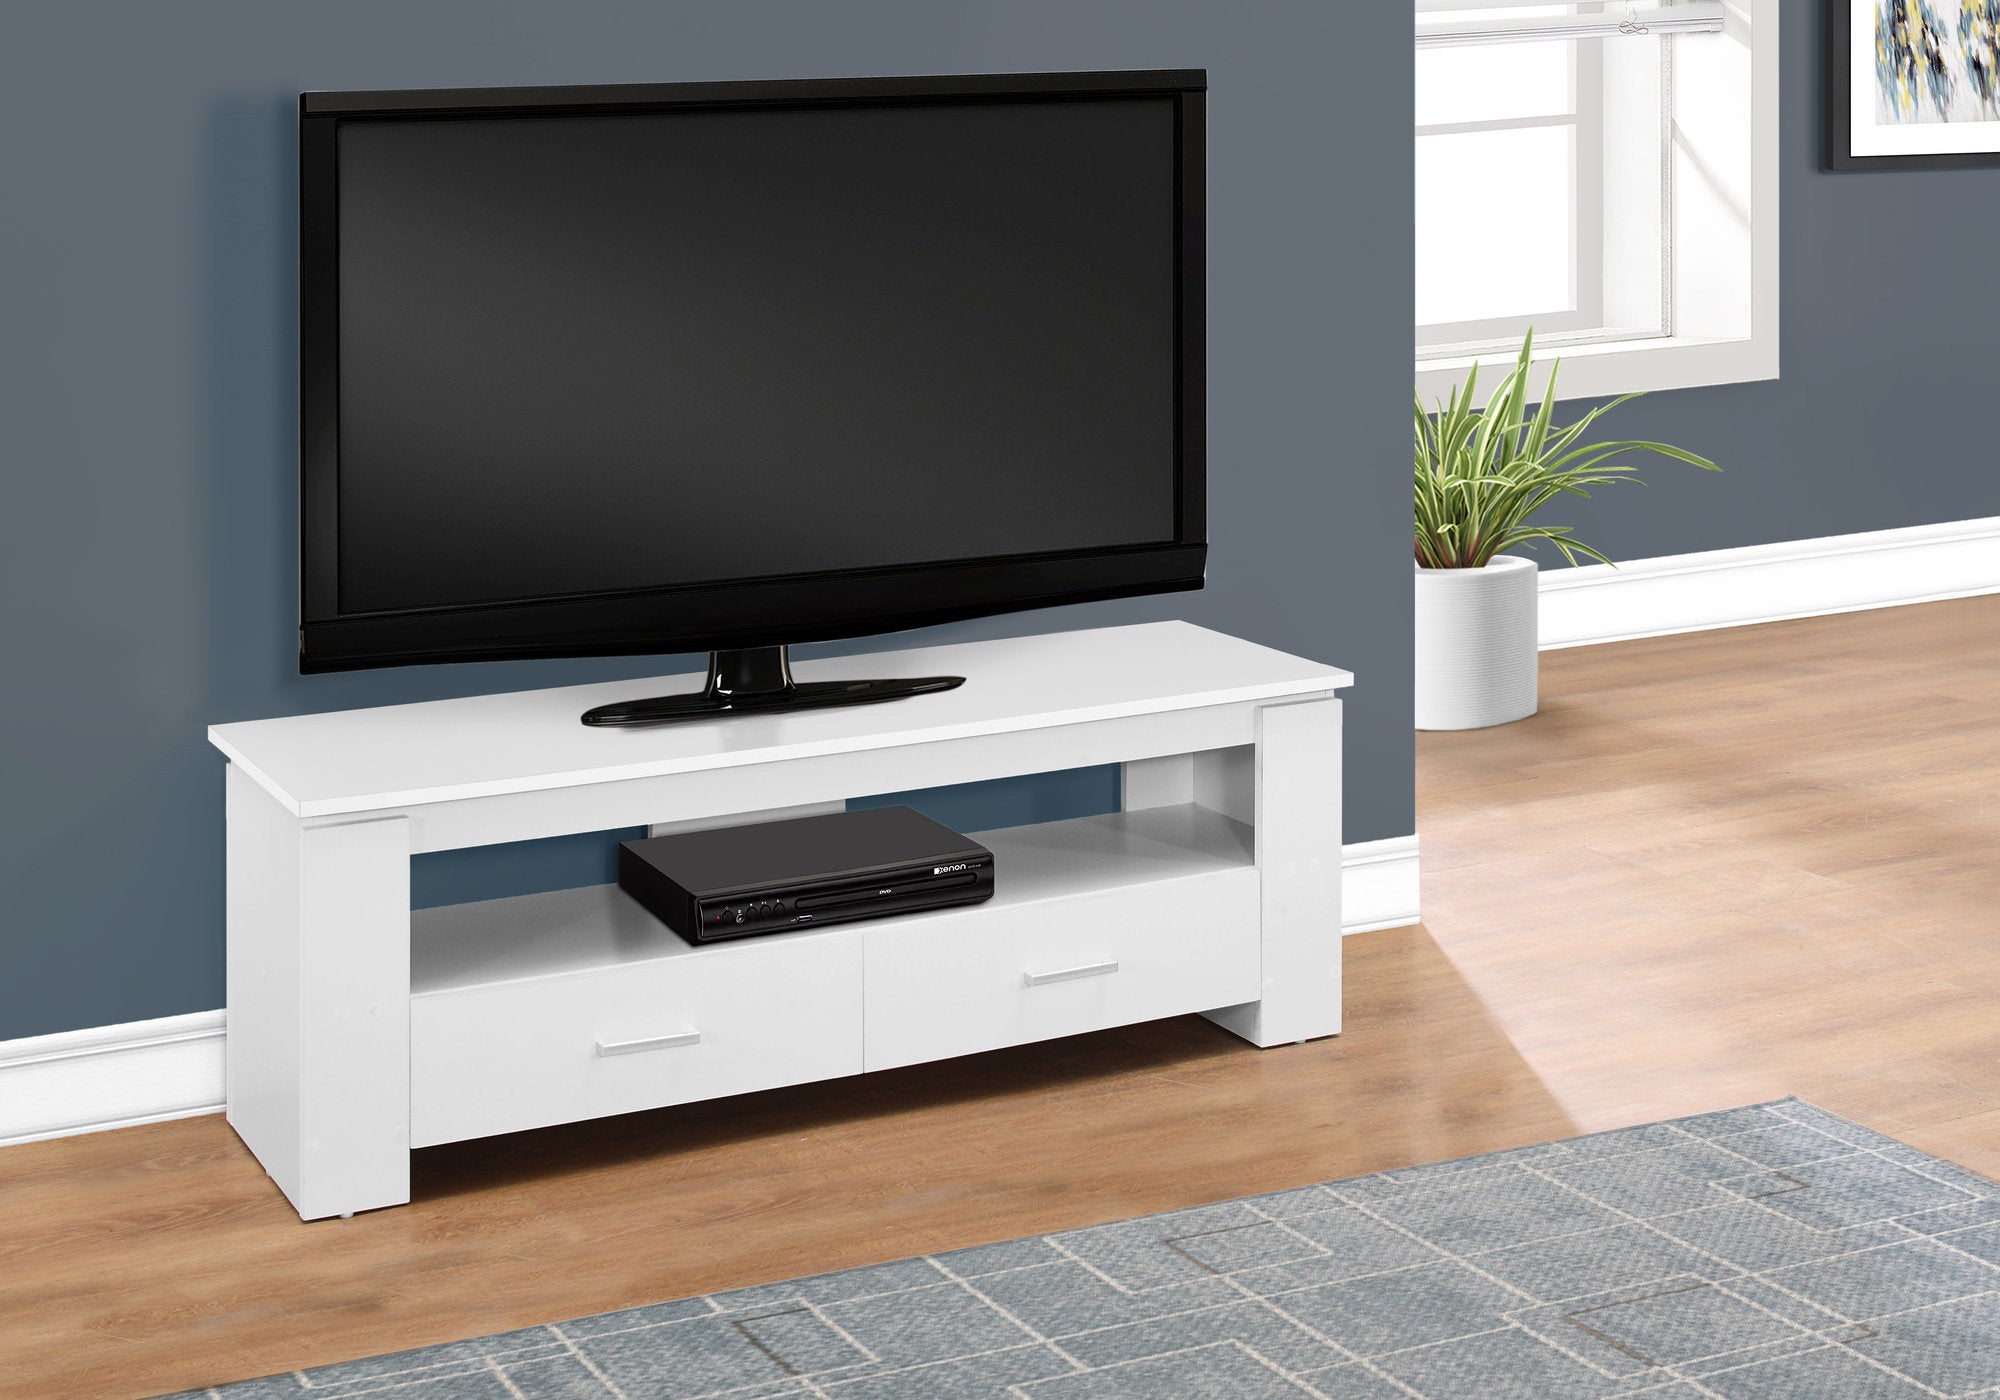 MN-752601    Tv Stand, 48 Inch, Console, Media Entertainment Center, Storage Cabinet, Living Room, Bedroom, Laminate, White, Contemporary, Modern